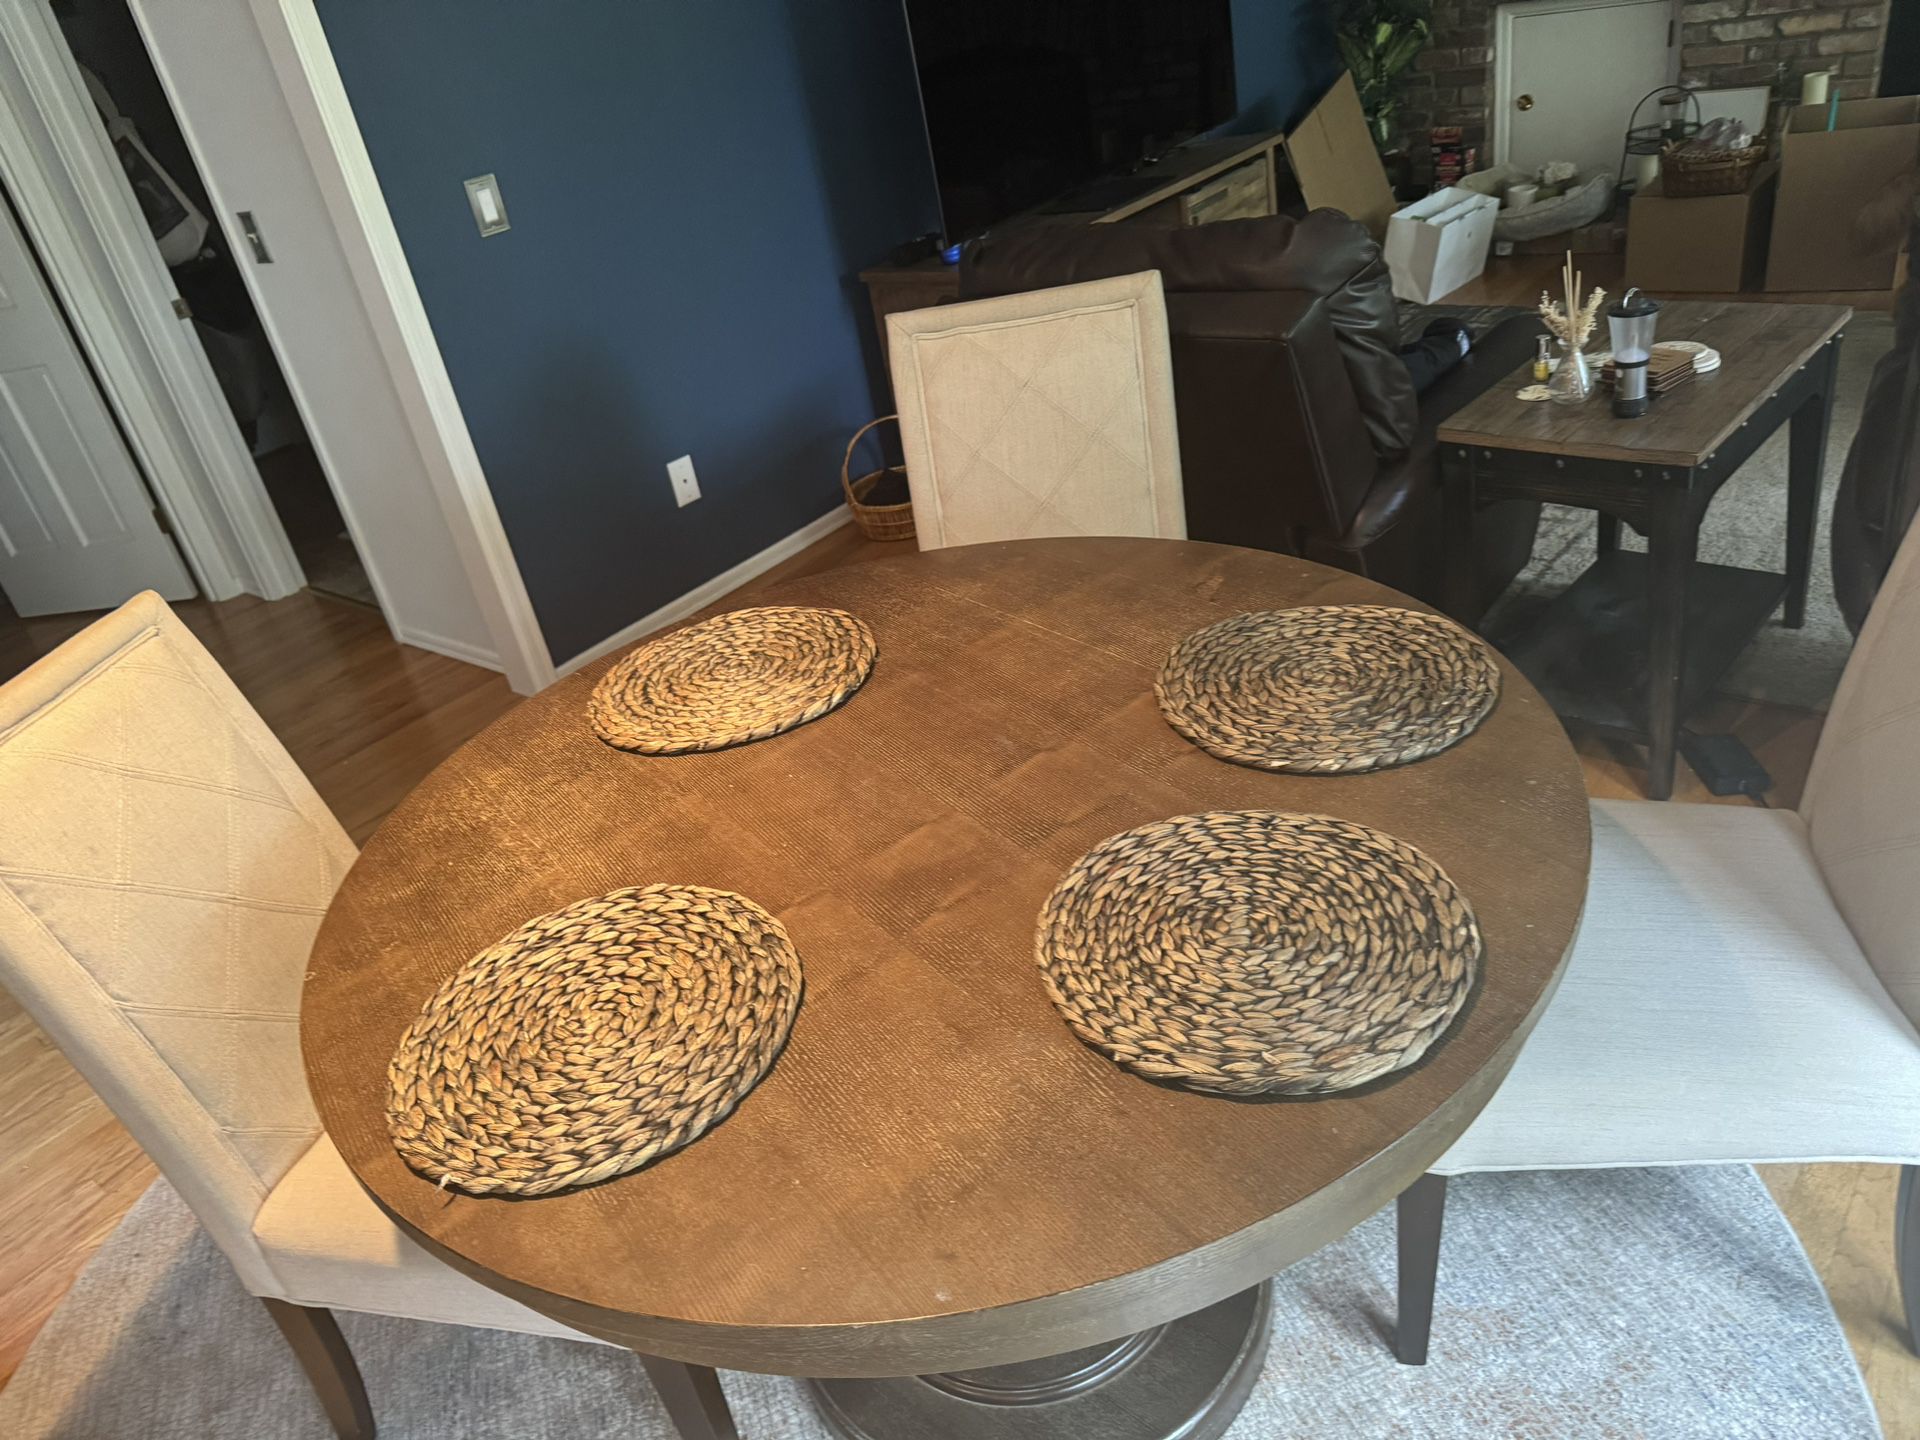 Round Dining Table With 4 Chairs